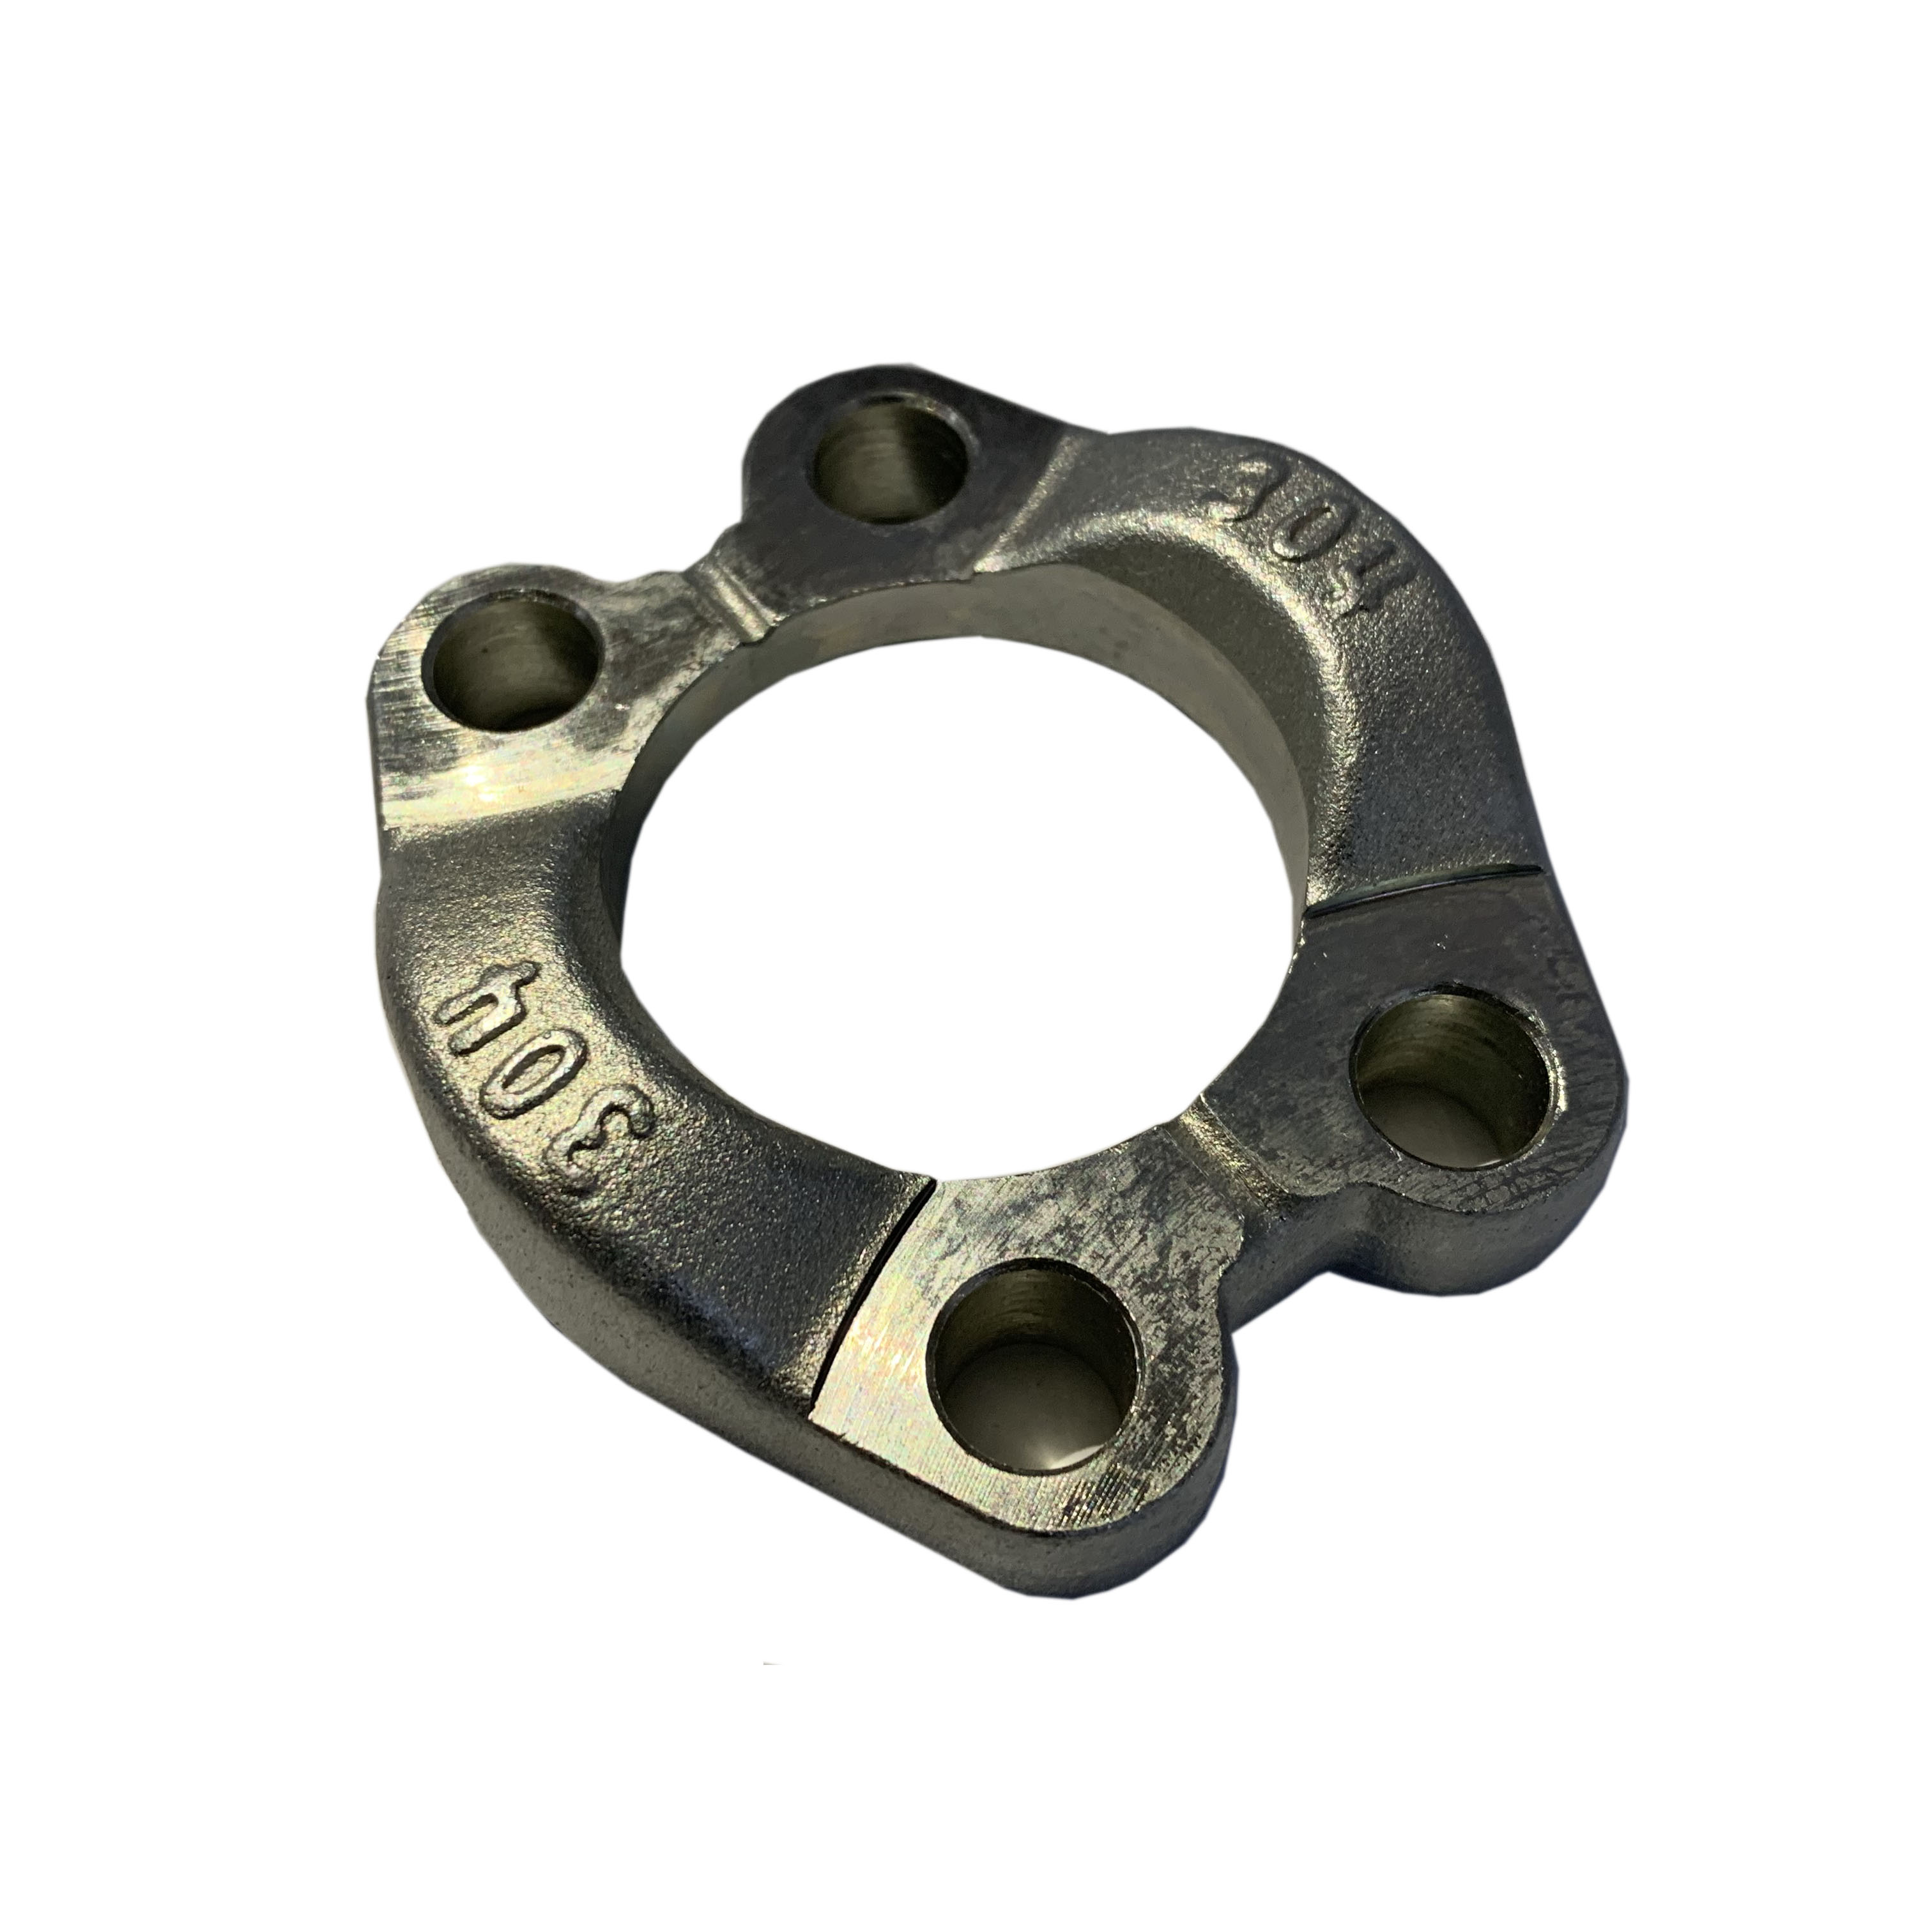 Hydraulic Pipe Fittings SAE Hydraulic Flanges